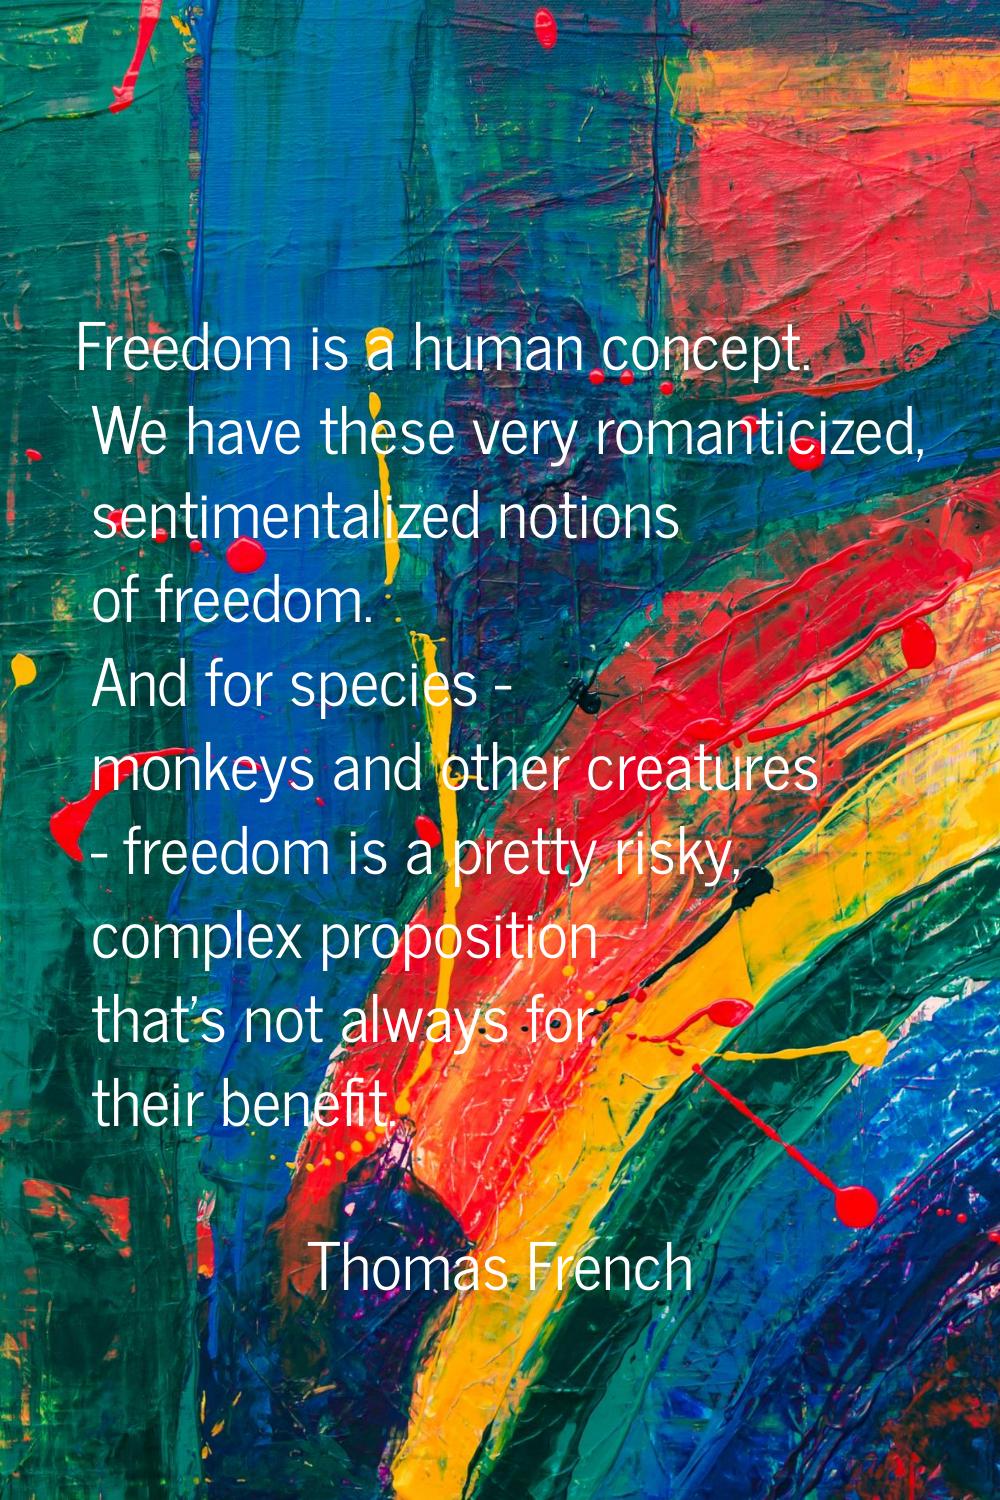 Freedom is a human concept. We have these very romanticized, sentimentalized notions of freedom. An